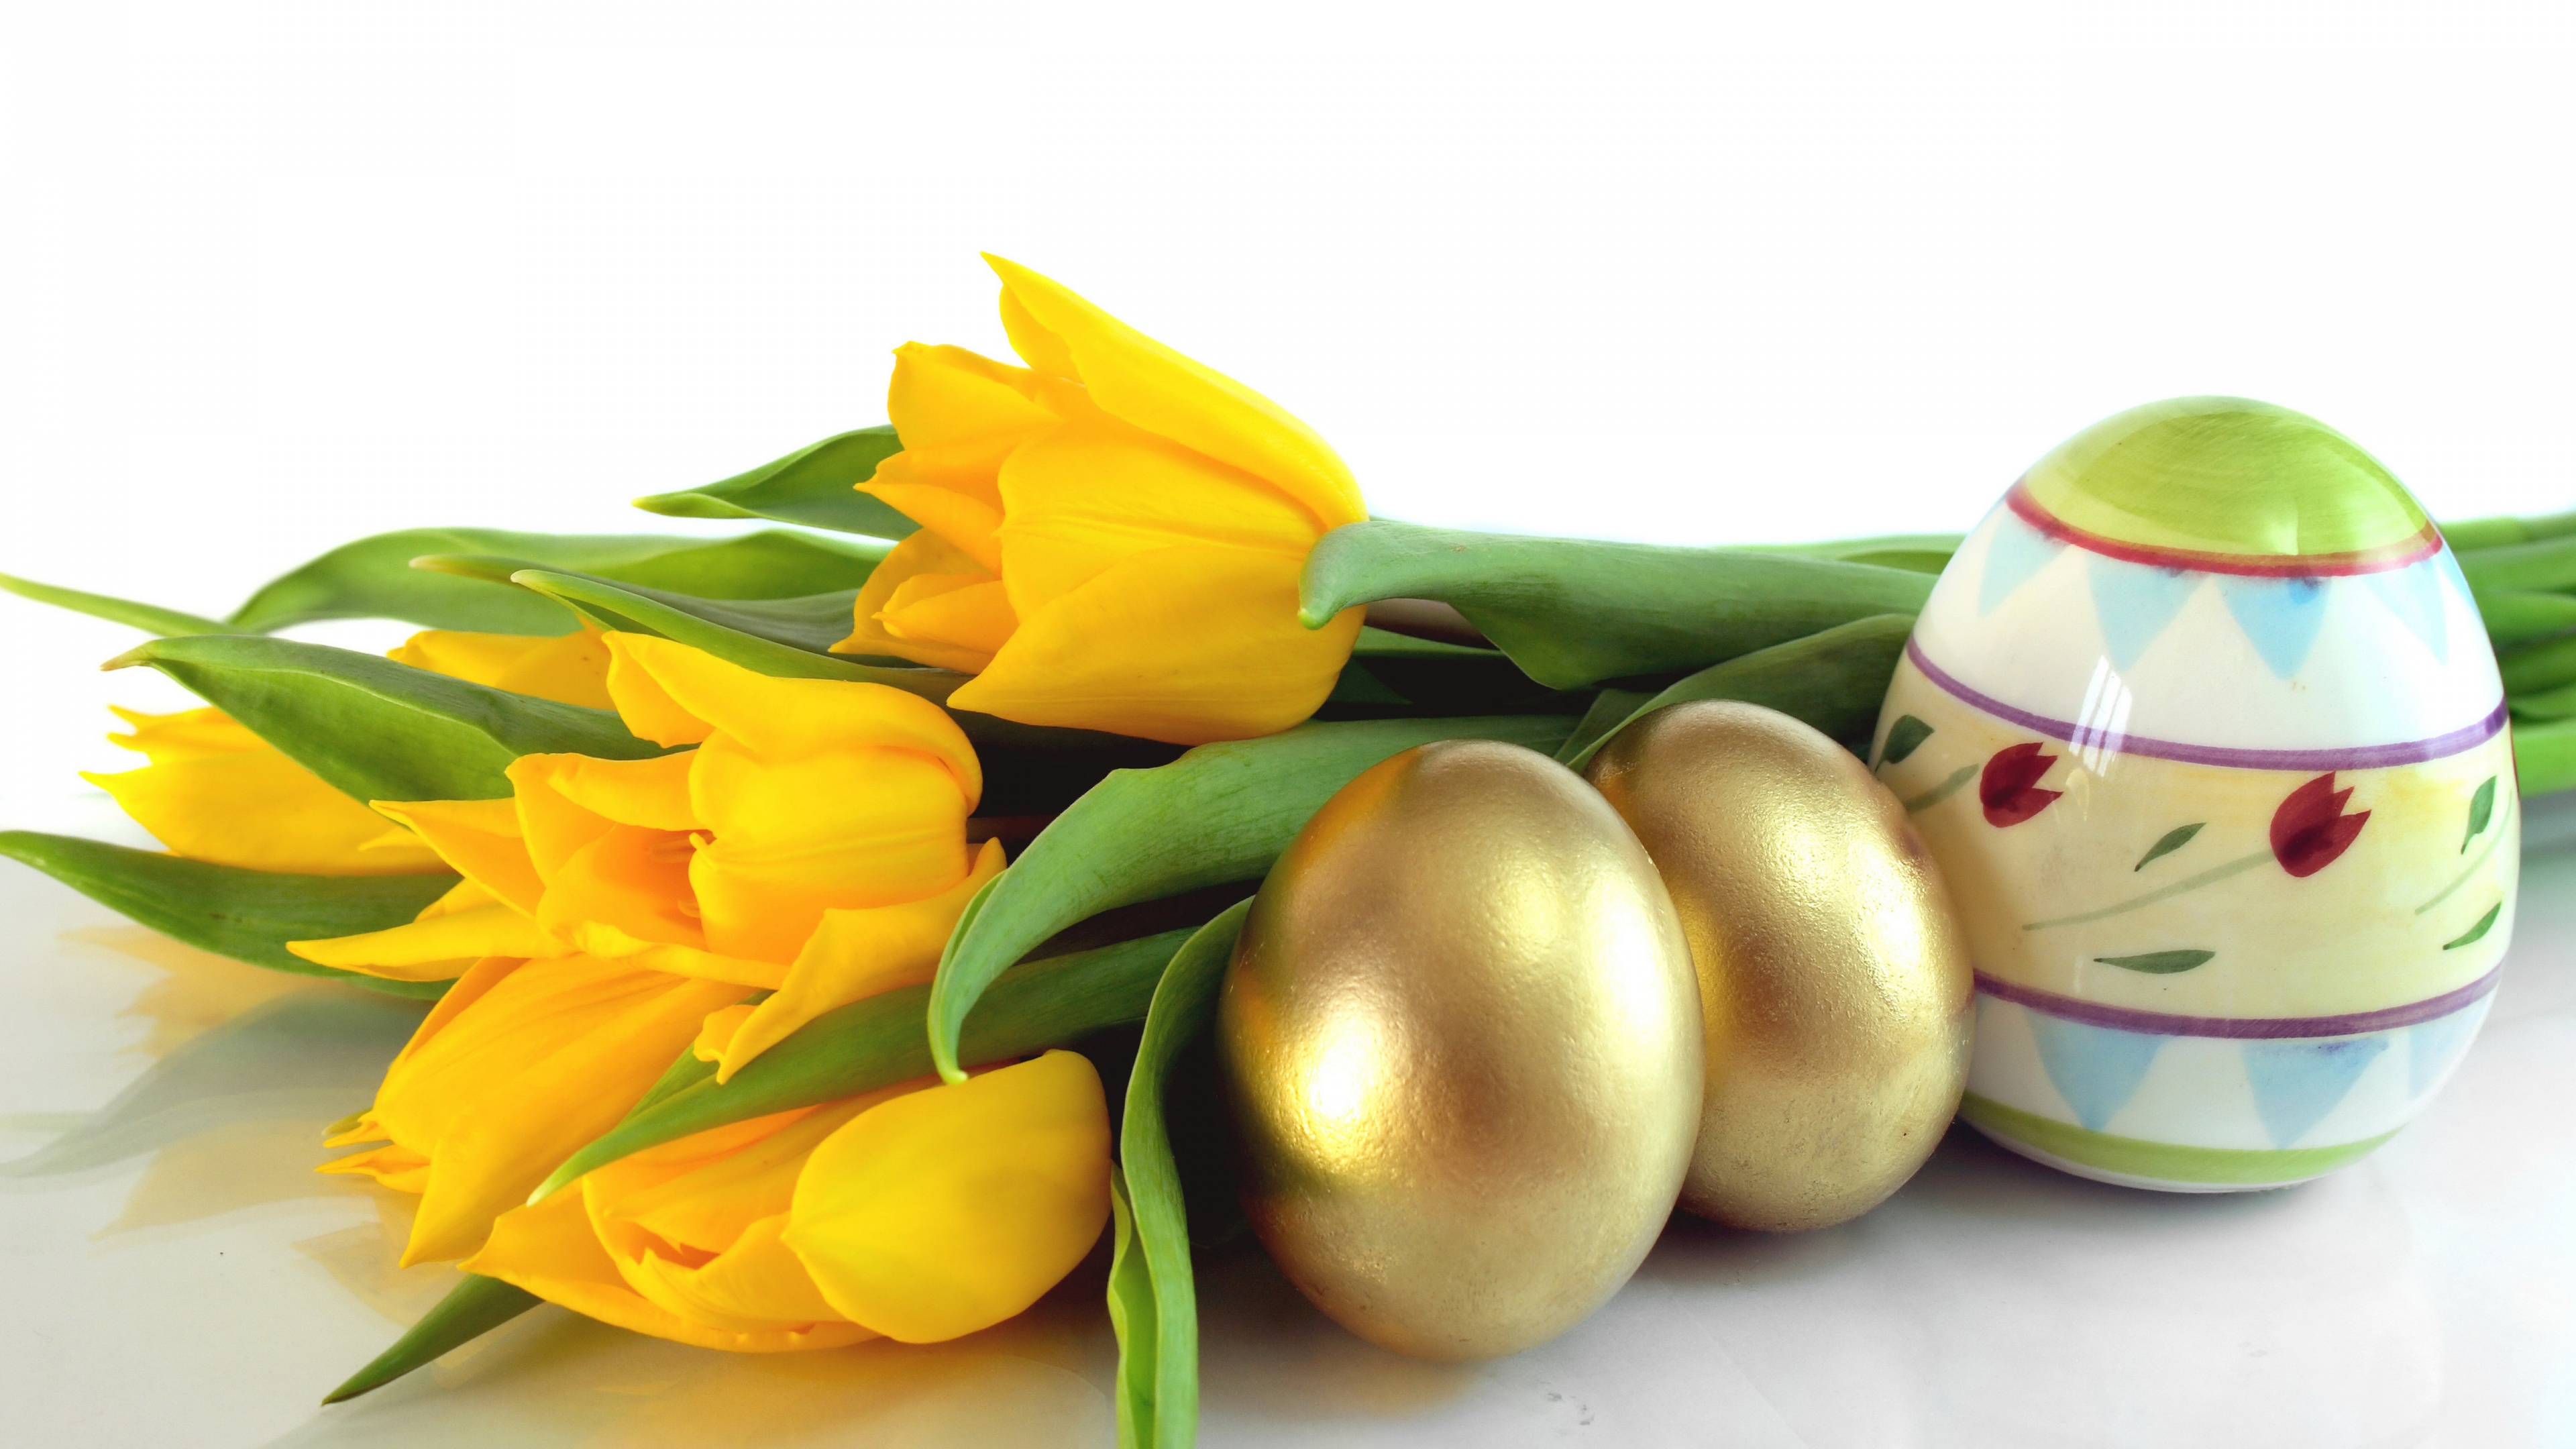 Easter Eggs And Yellow Tulips